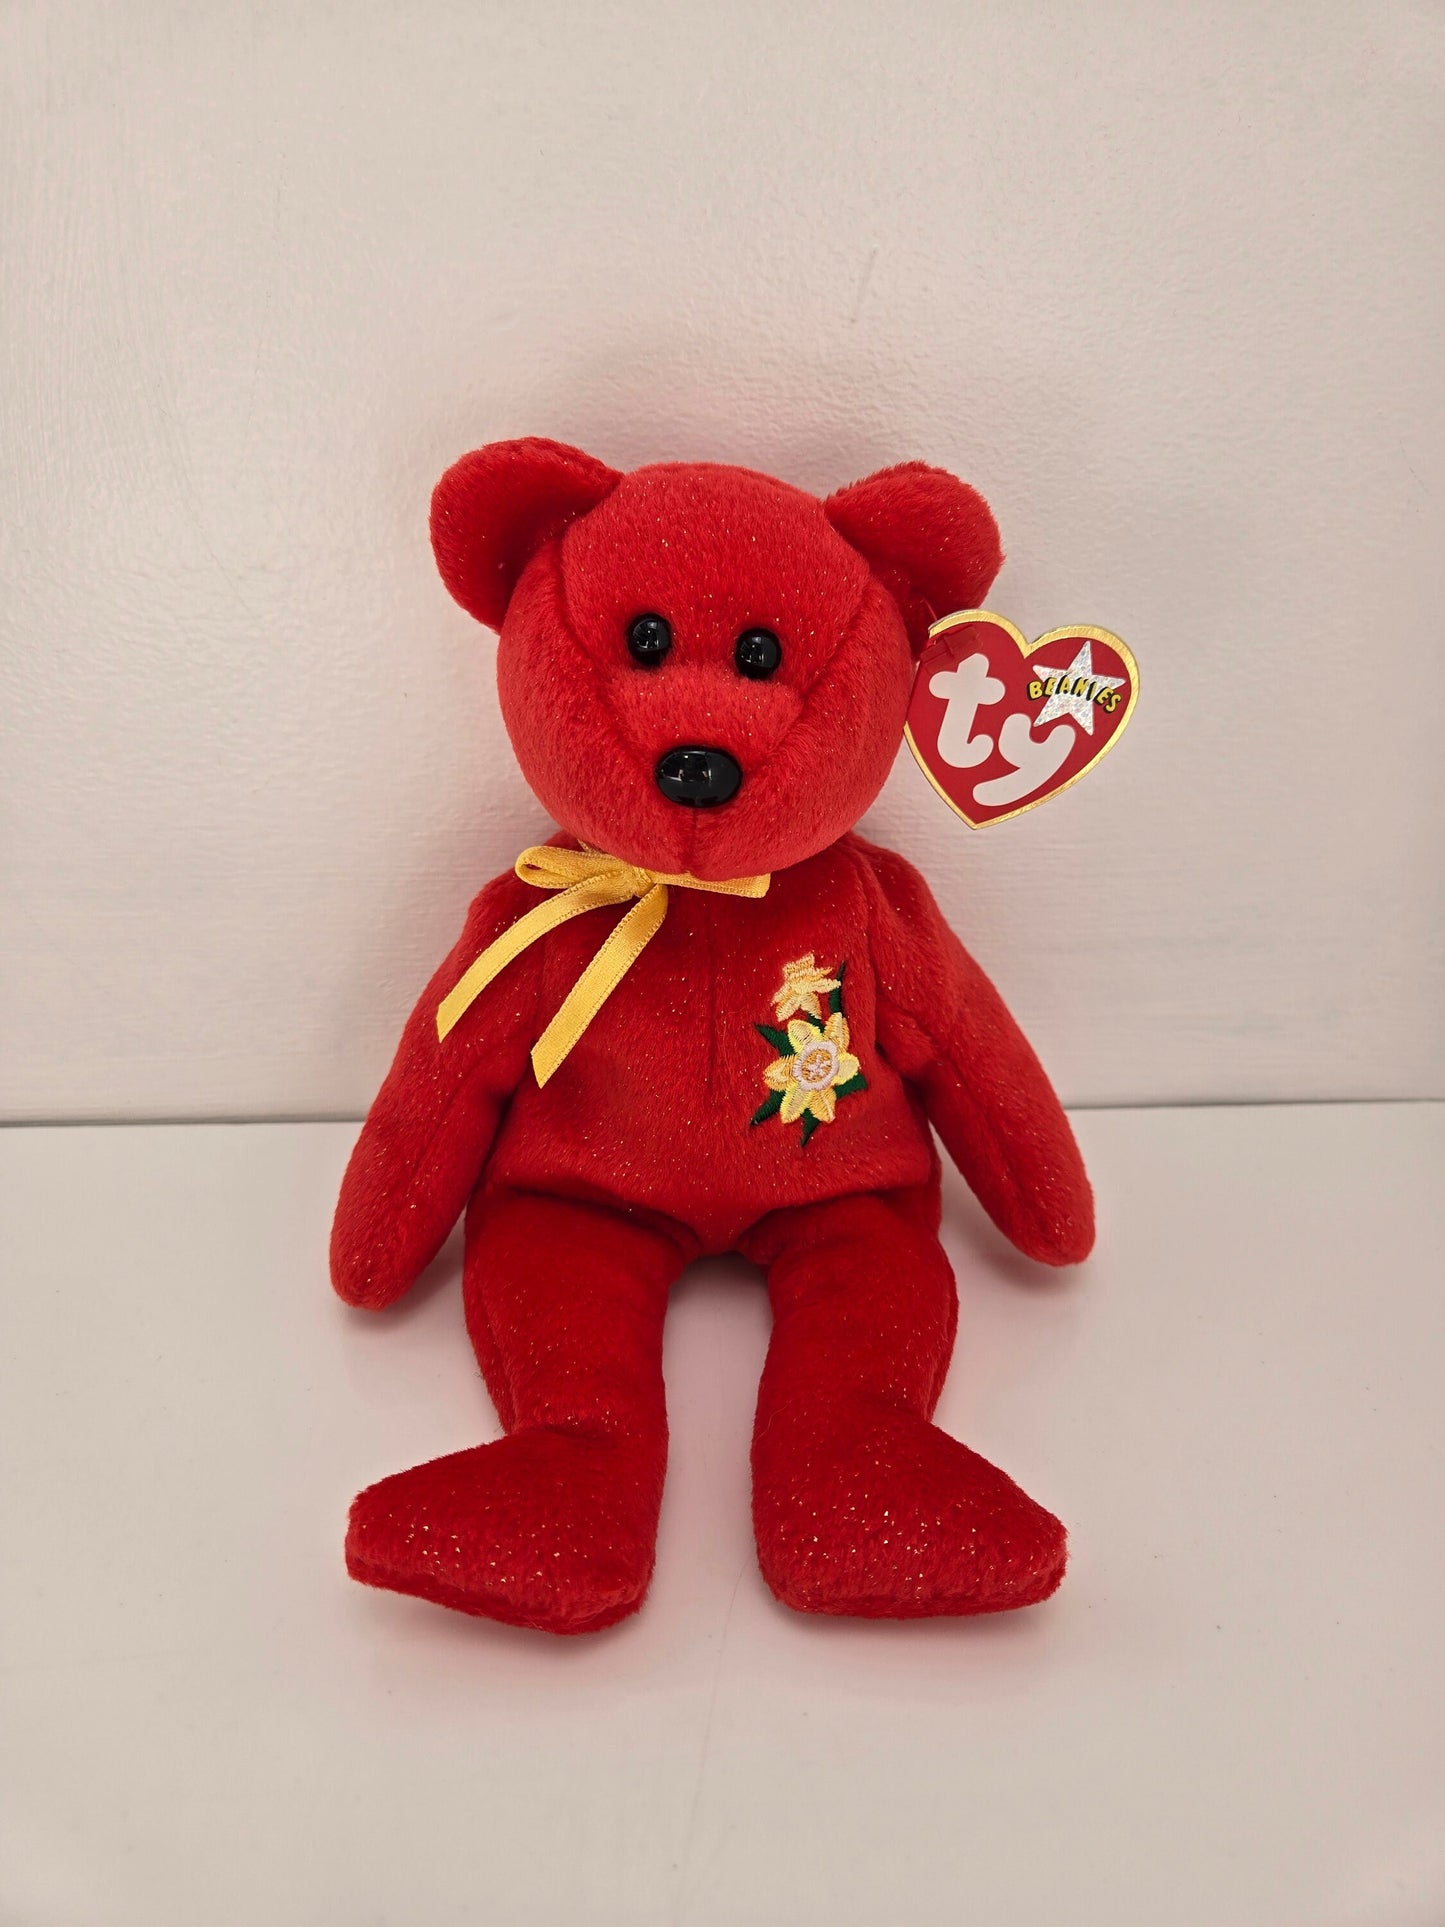 Ty Beanie Baby “Daffodil” the Red Bear - UK Exclusive (8.5 inch)